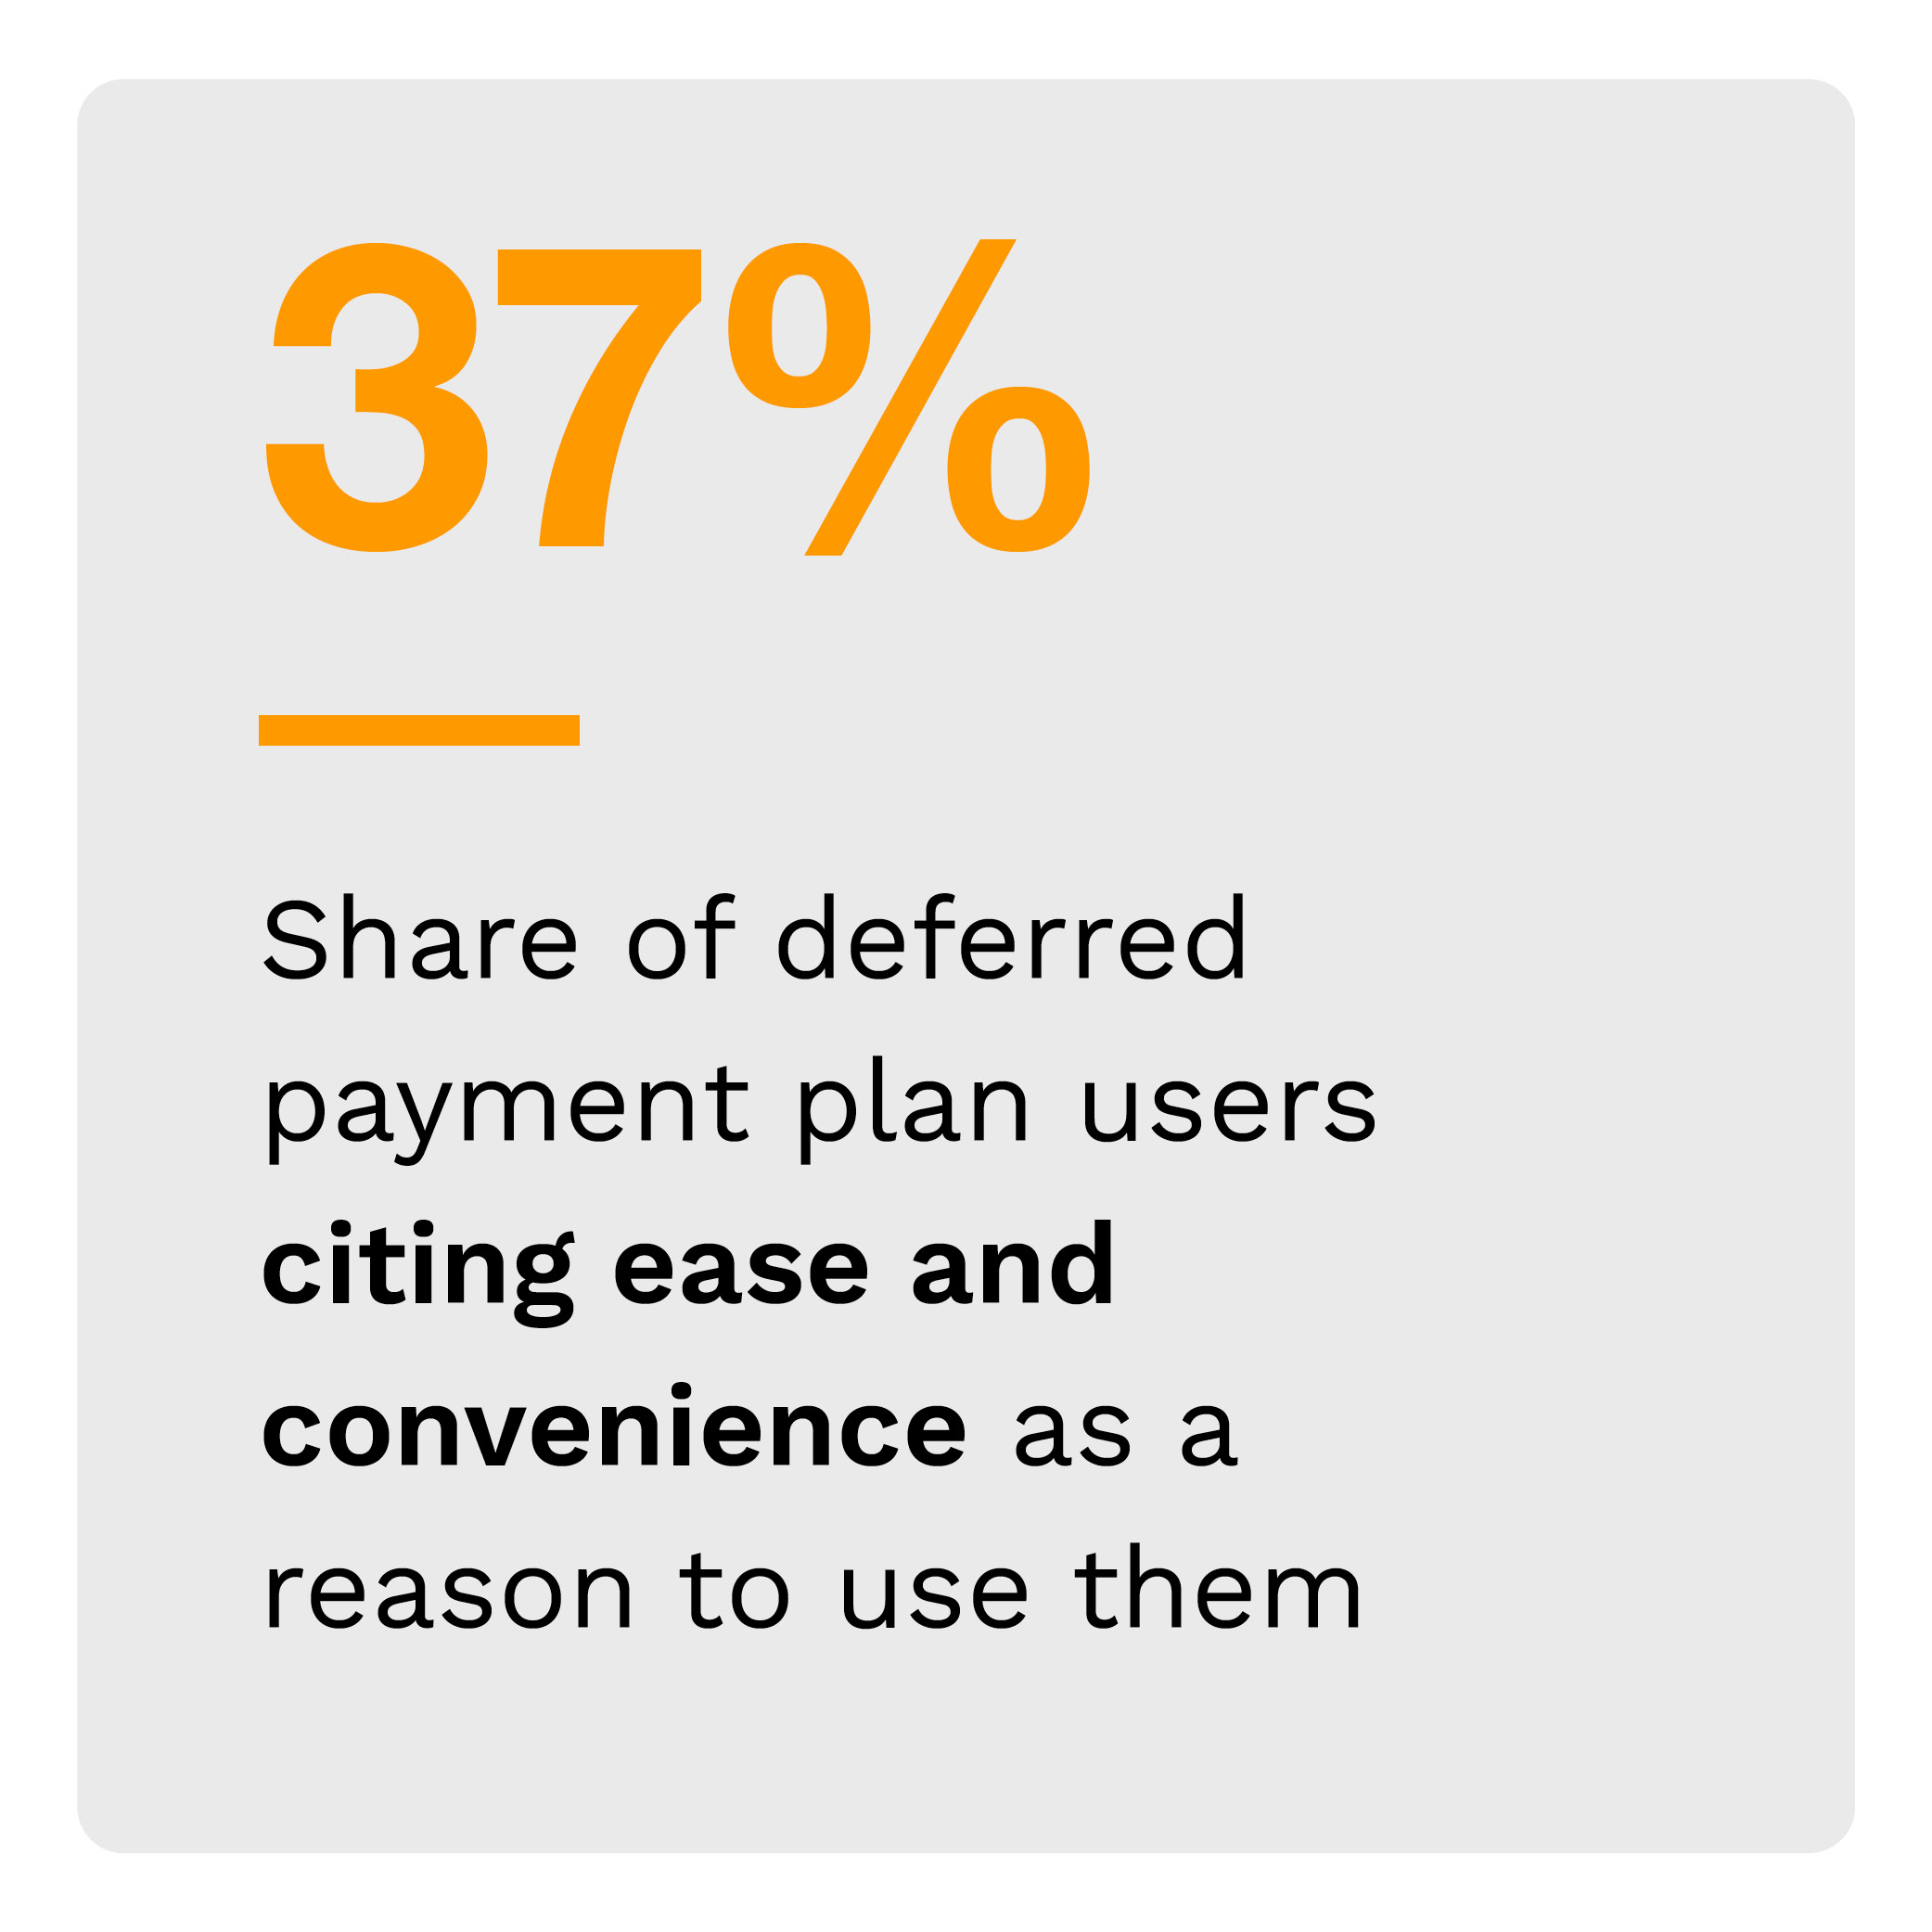 37%: Share of deferred payment plan users citing ease and convenience as a reason to use them